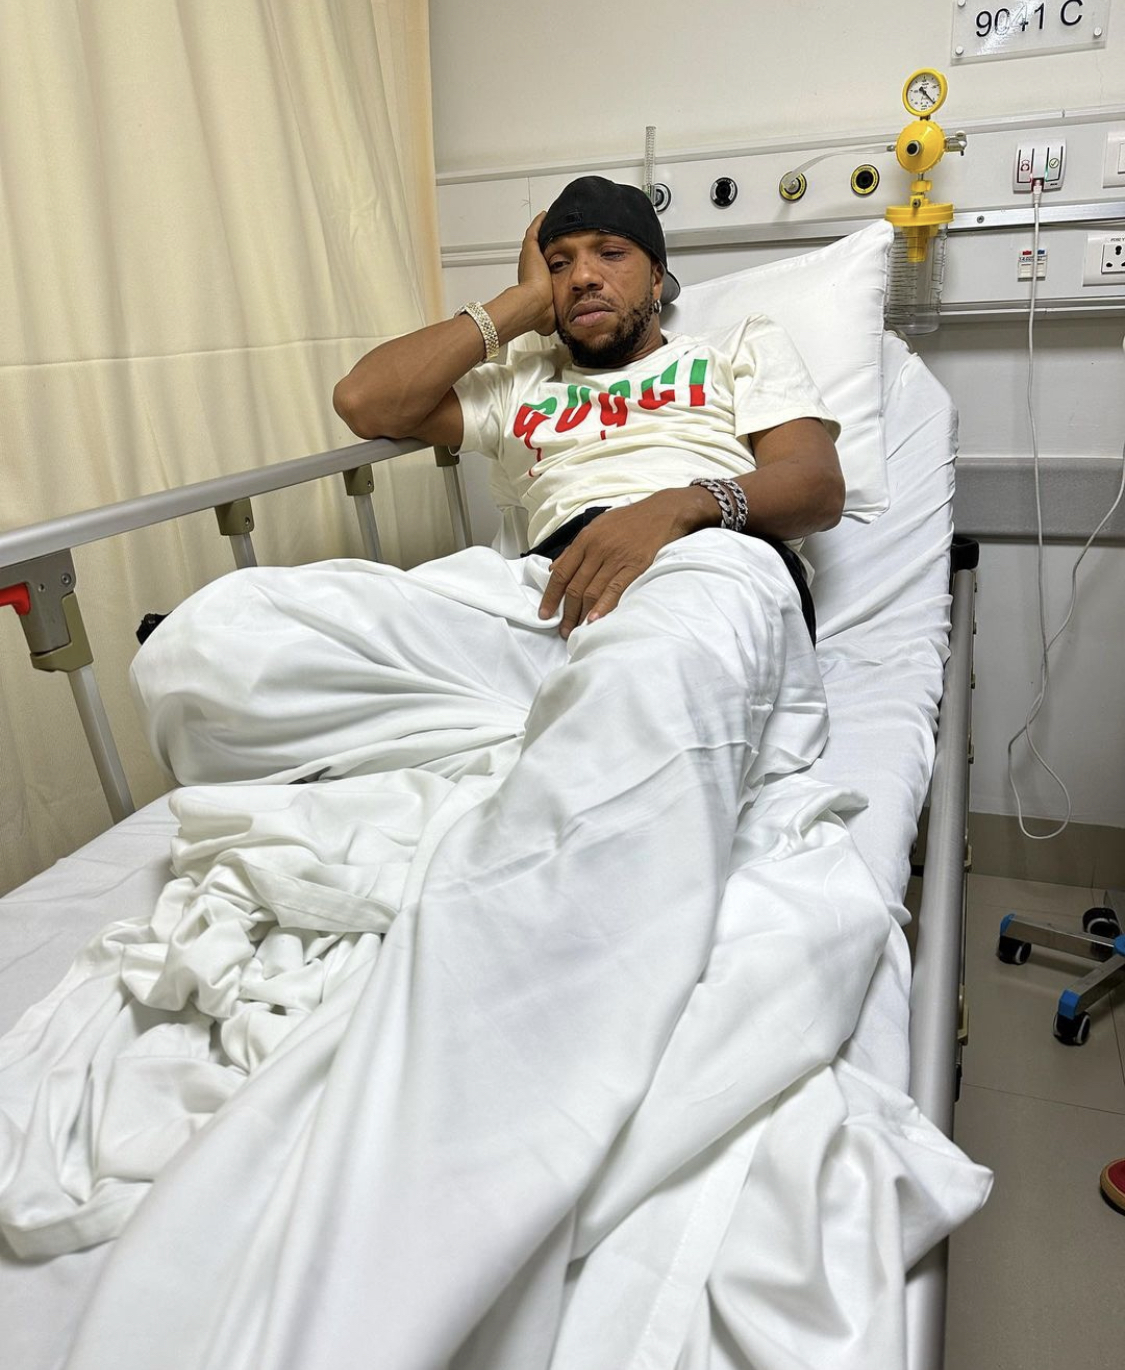 Actor Charles Okocha hospitalized after narrowly surviving ghastly car accident at 3rd Mainland Bridge [photos]